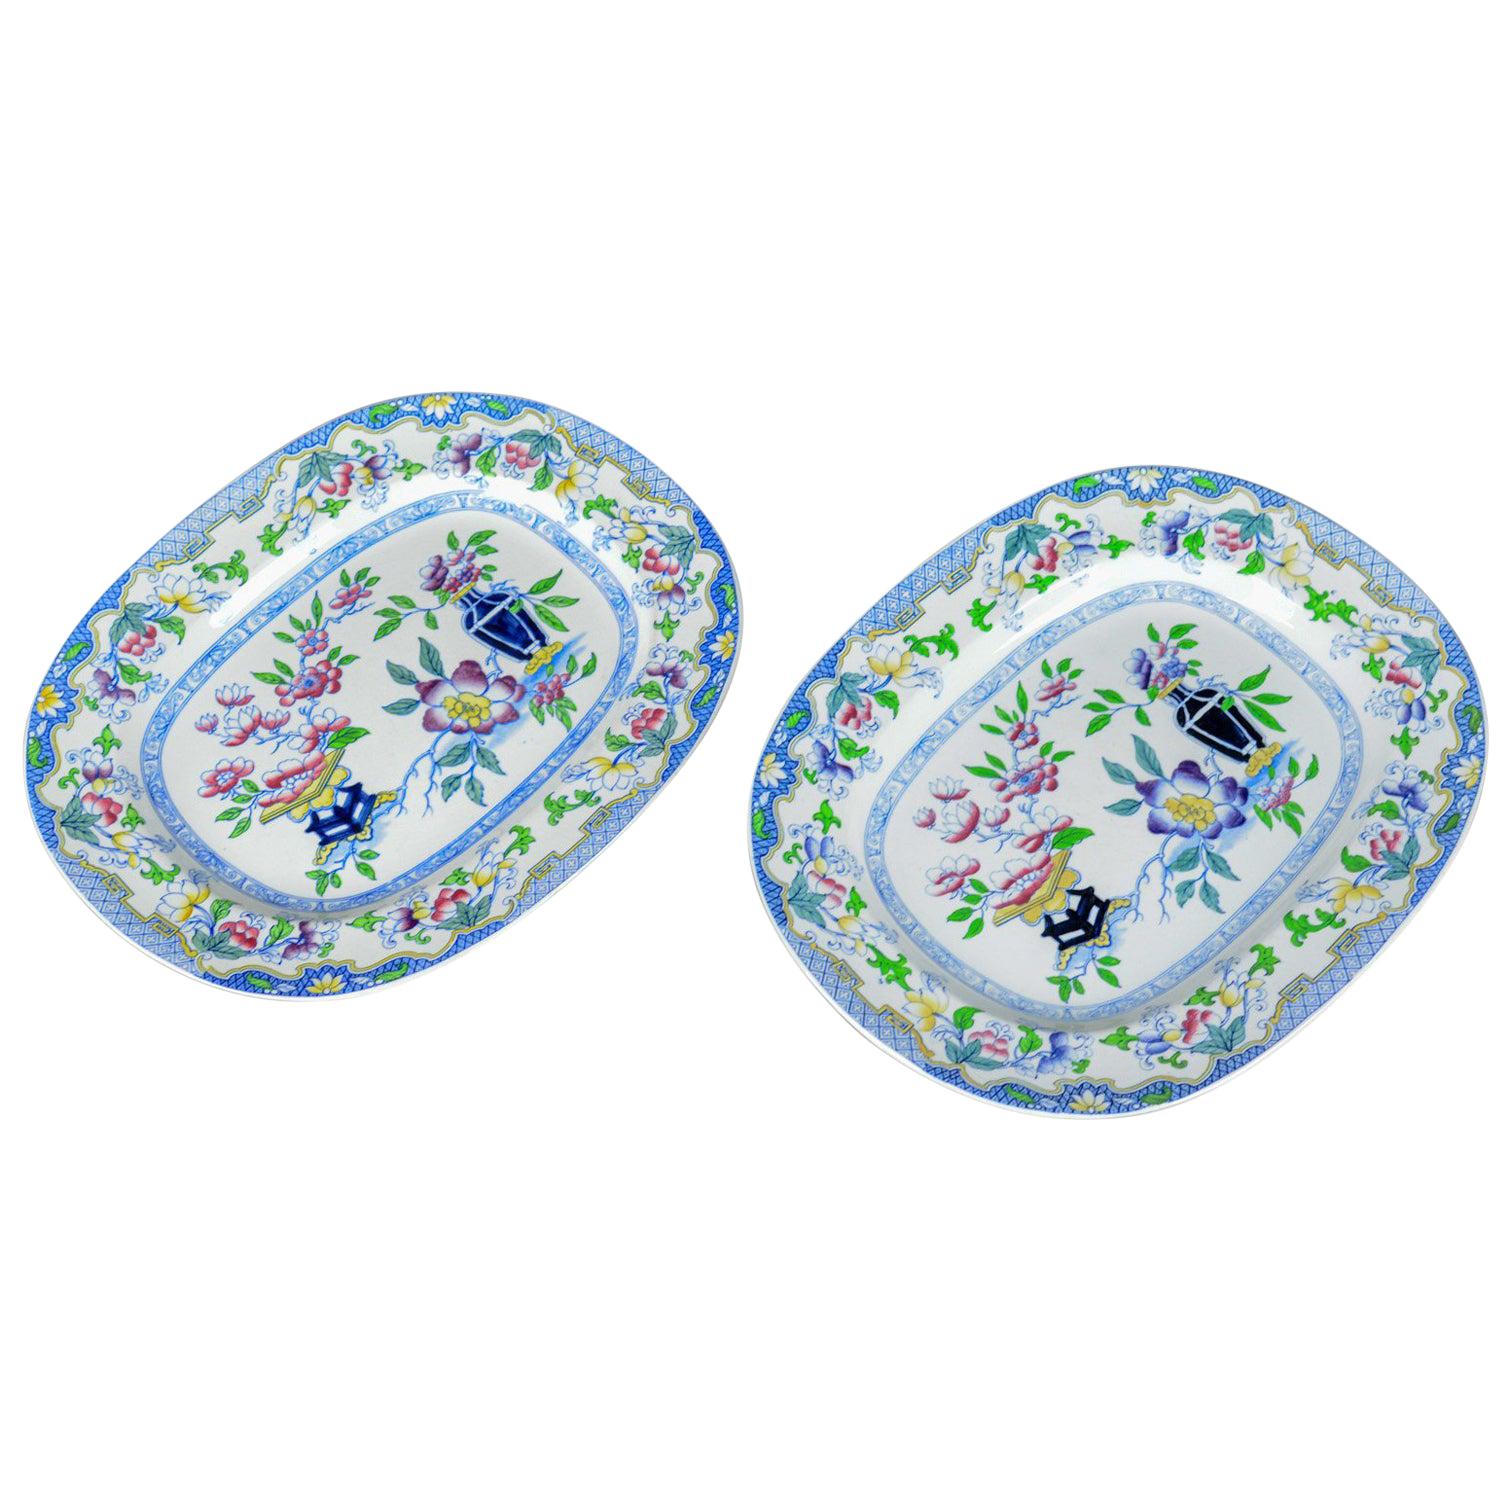 Mintons Ovular Serving Plates, English, Early 20th Century, Ceramic Dishes